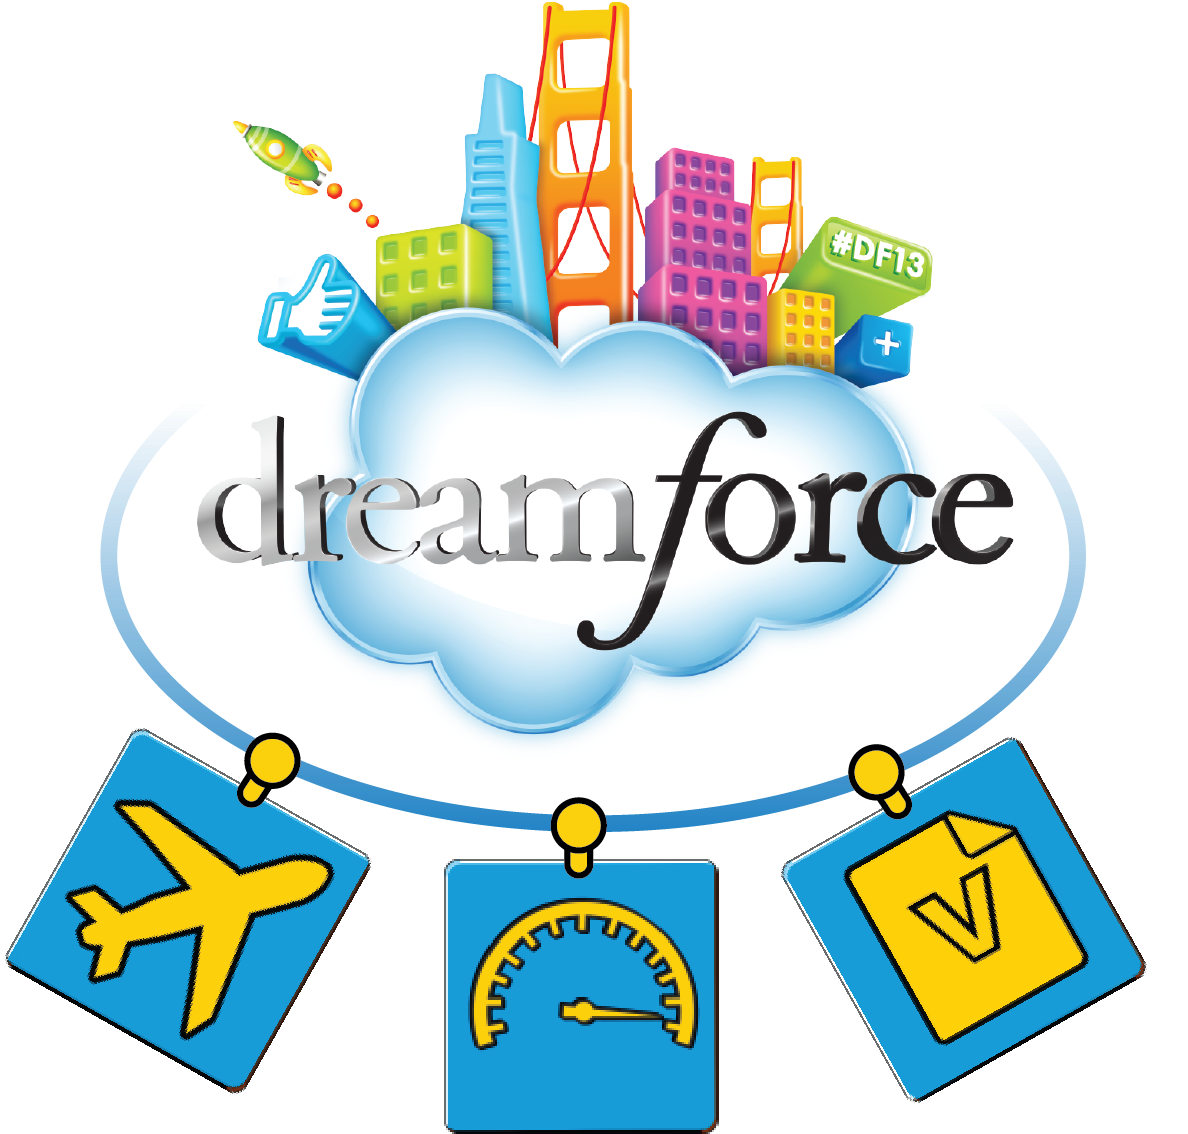 As A Salesforce Architect Or Developer, Your Job Is - Dreamforce (1224x1150)